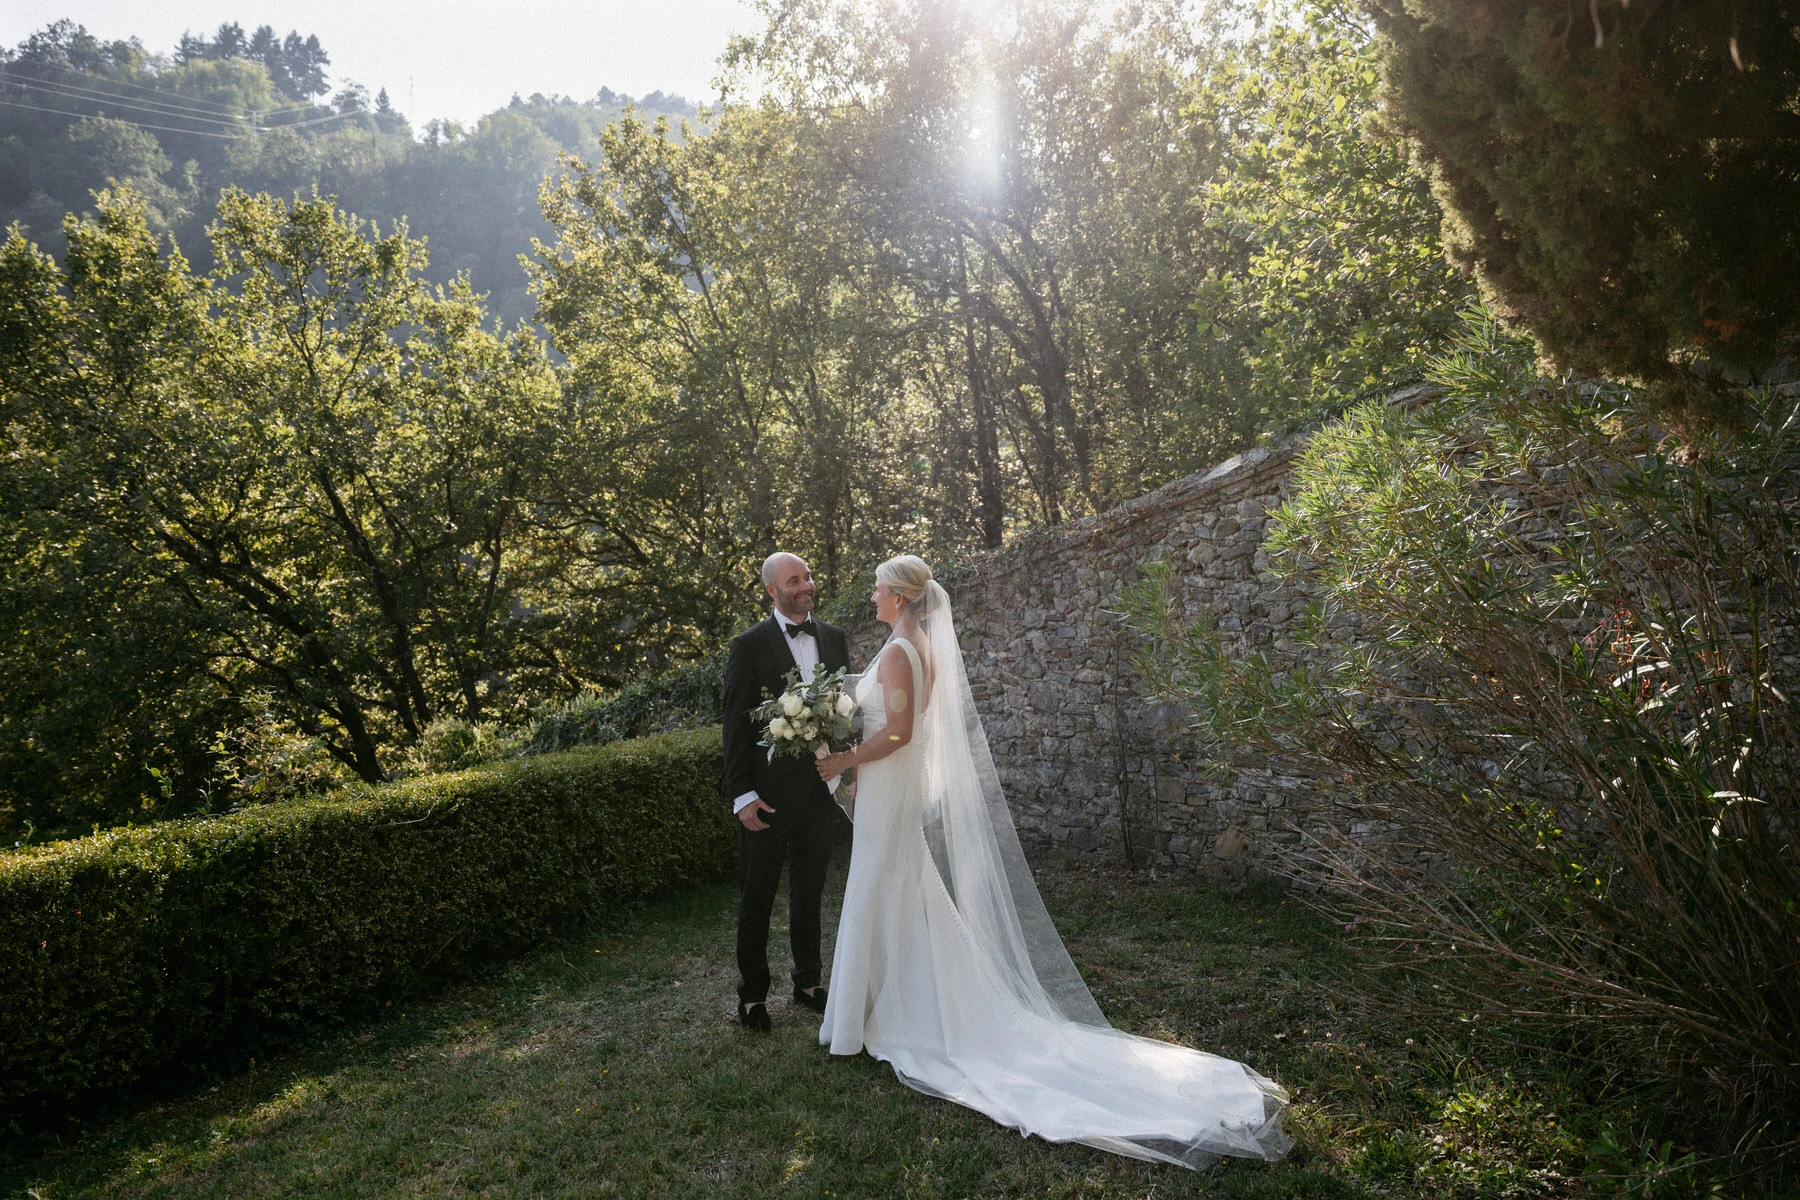 Timeless Elegance: A Dutch-American love story celebrated in Tuscany